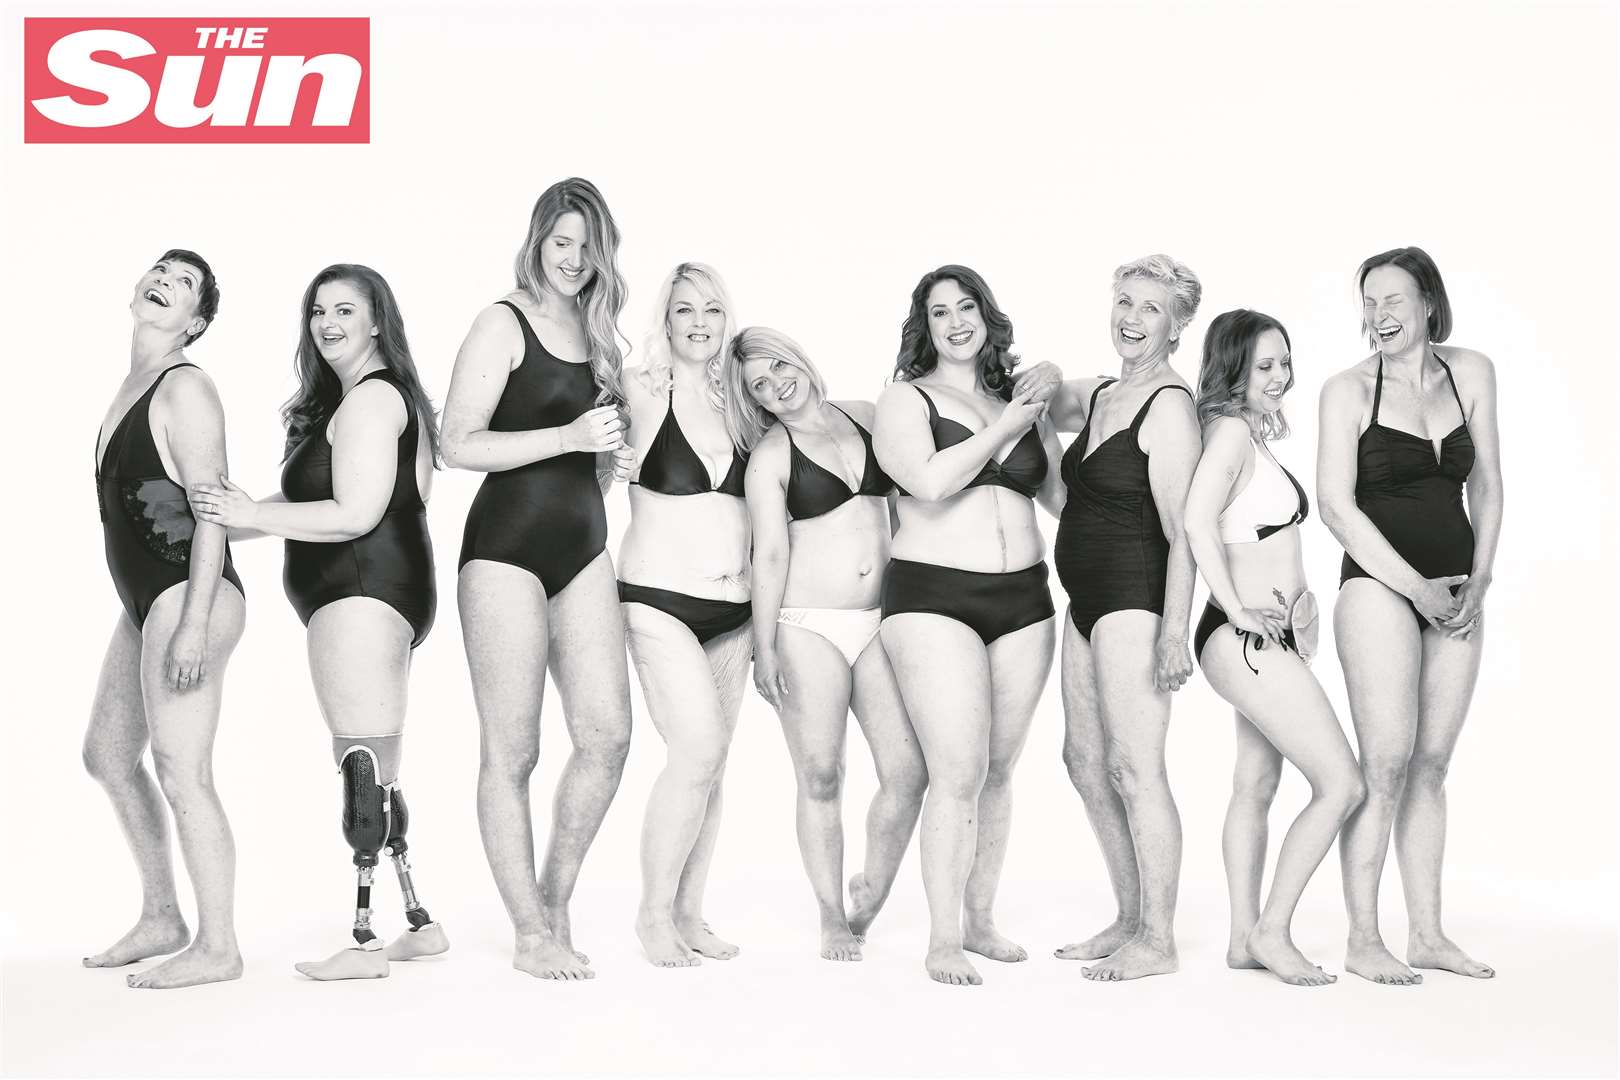 The Sun recreates the Loose Women image with real women who have overcome various health issues. Shelley Lawes is pictured second from the right. Picture courtesy of The Sun.